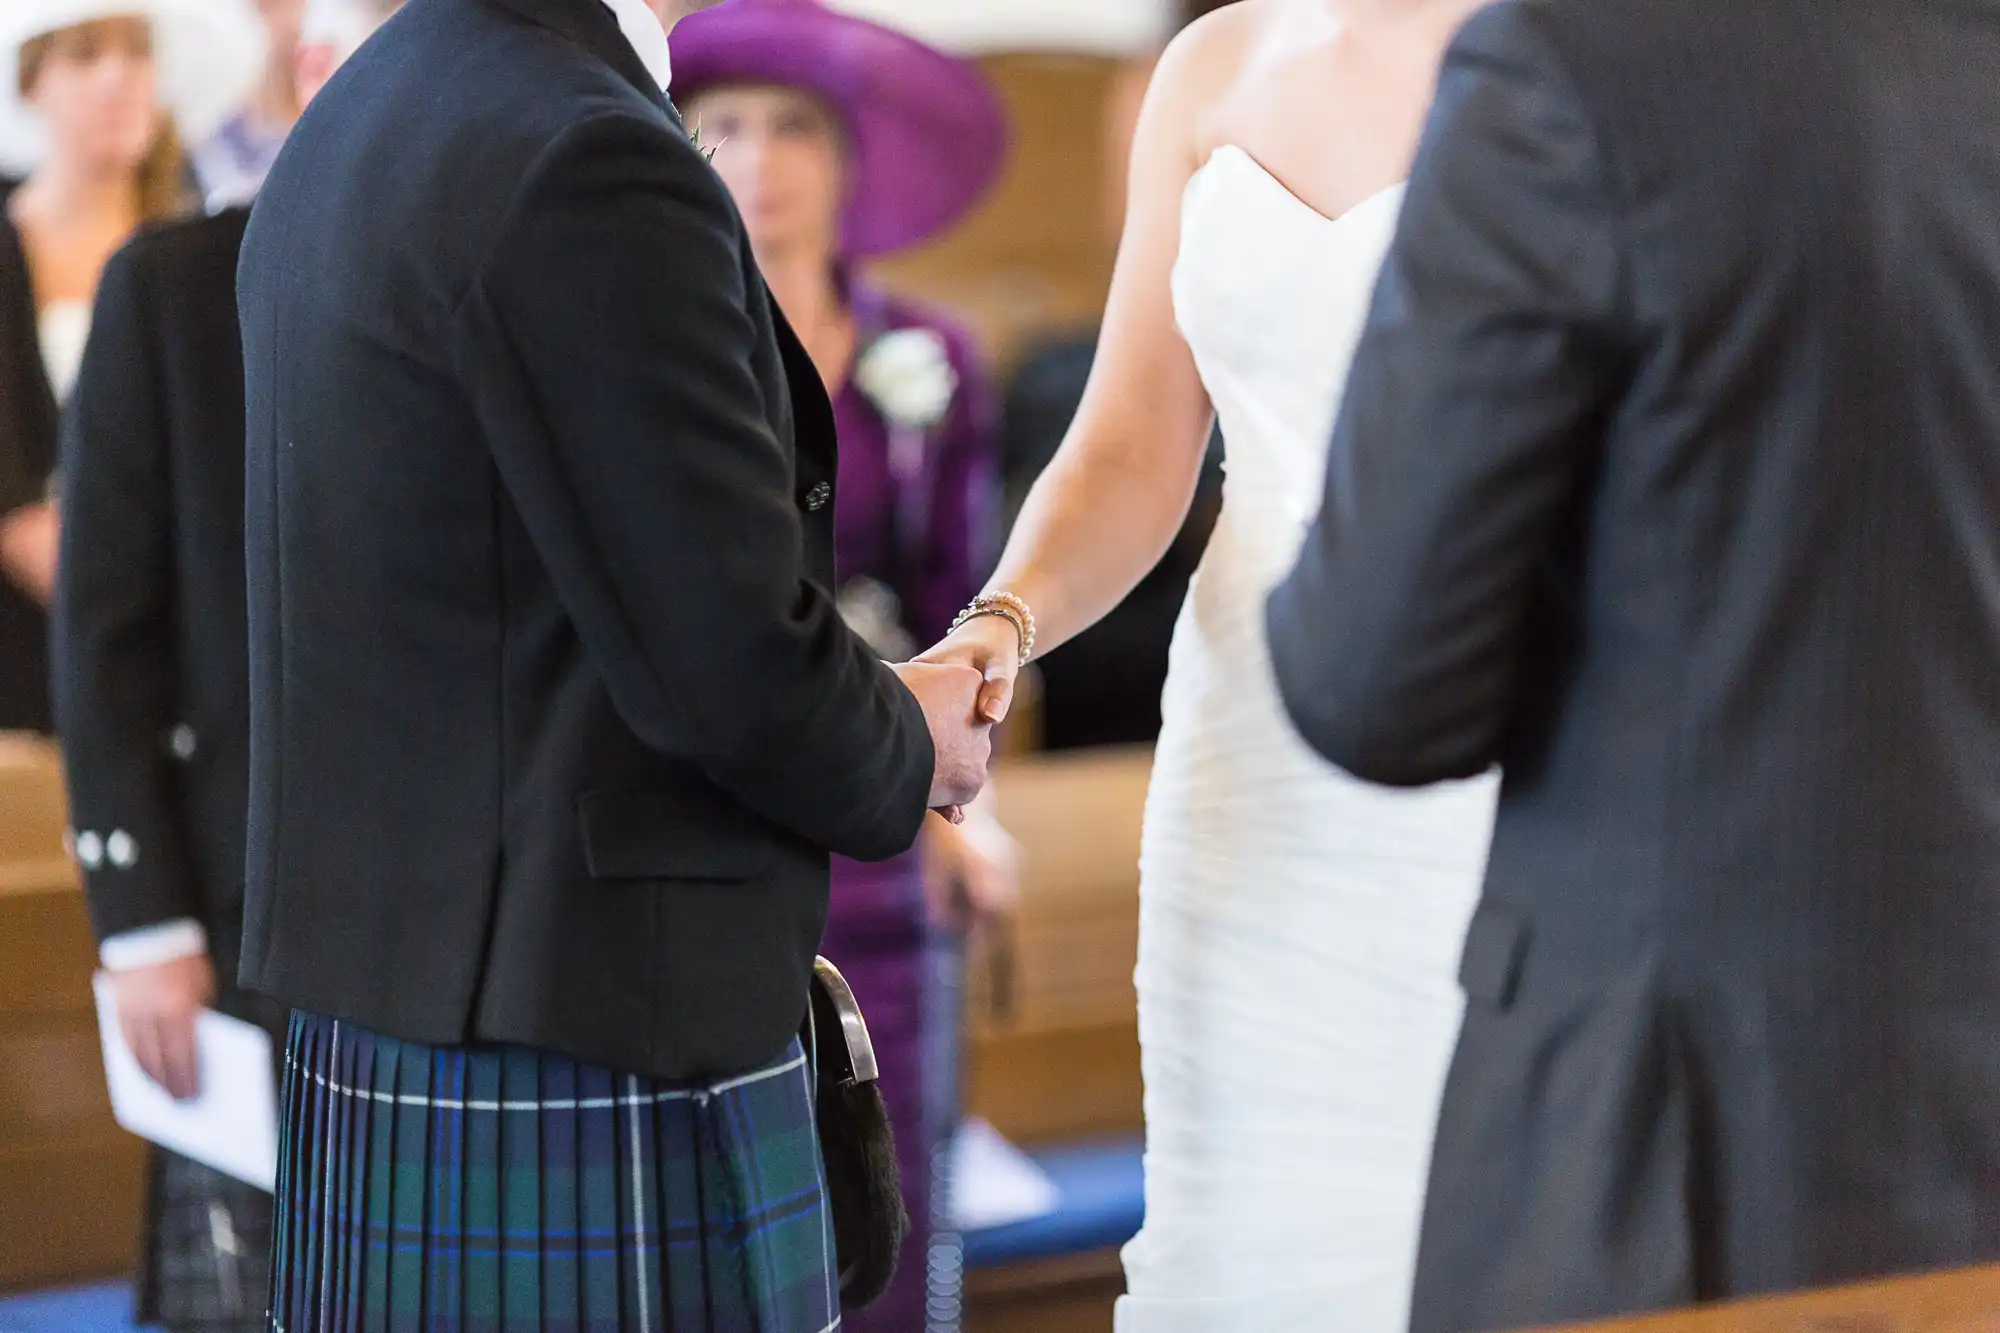 A bride and groom holding hands at their wedding ceremony, seen from behind a guest in a kilt and another in a purple hat.